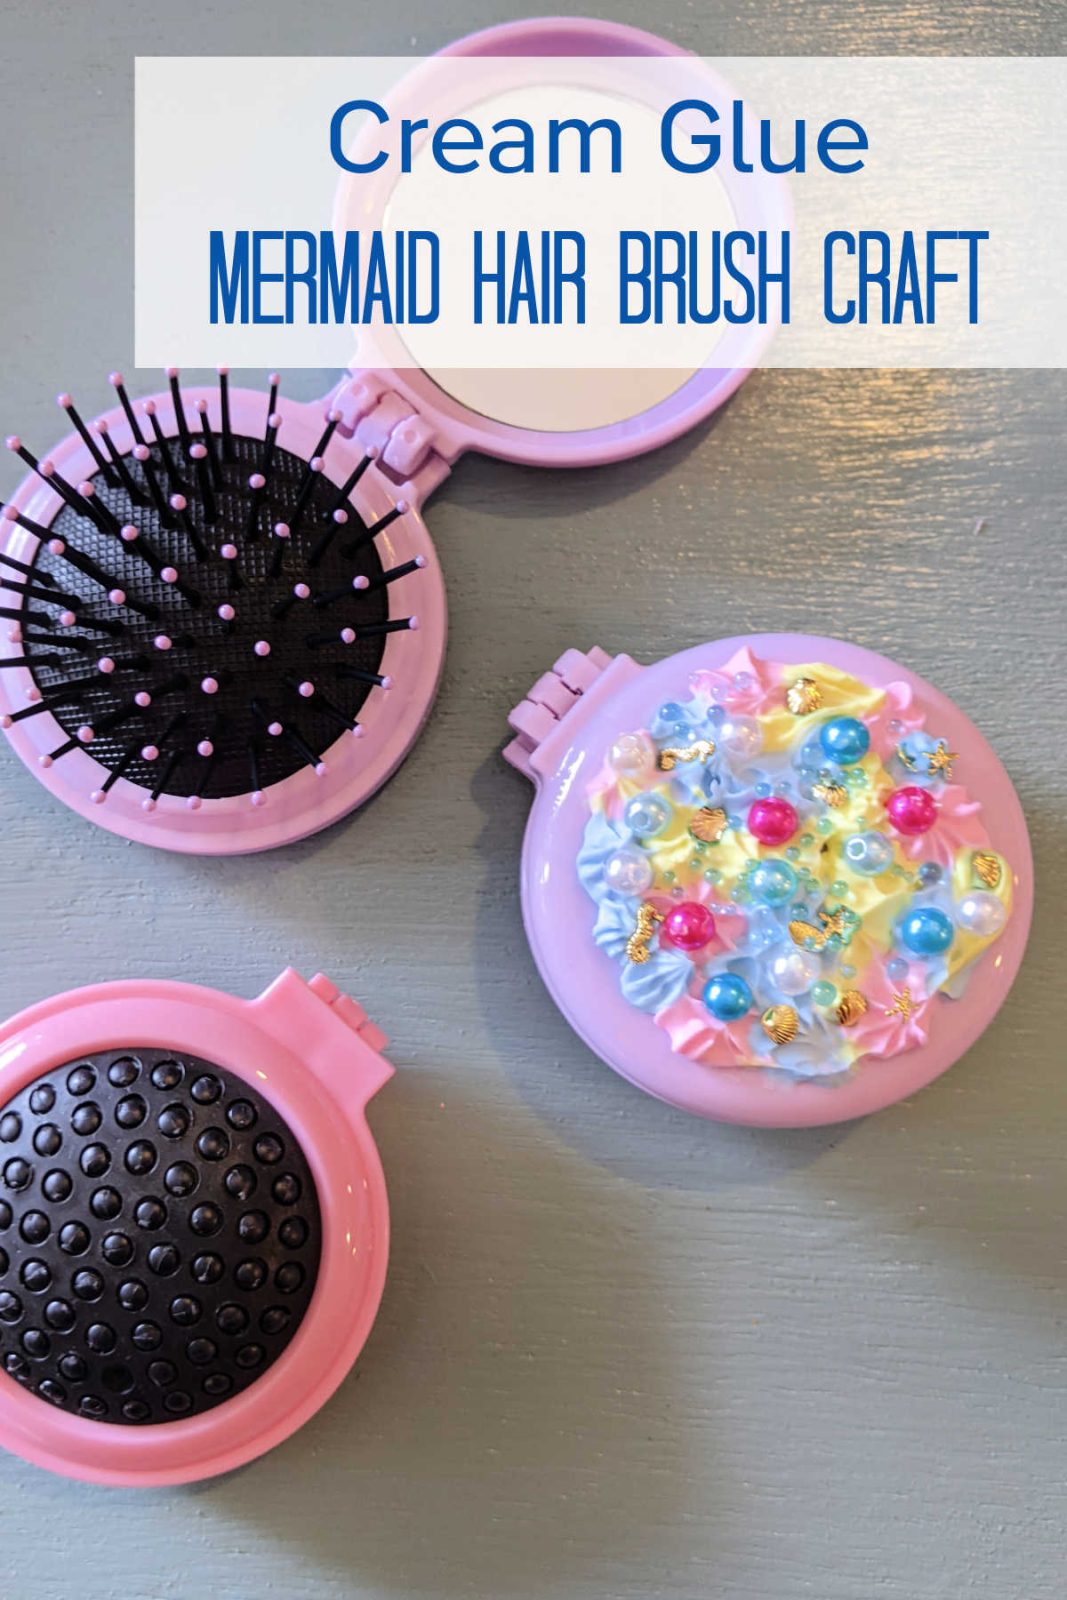 Brush away boring with this enchanting DIY Mermaid Hair Brush Craft! Easy & fun for all ages, this project lets you create a sparkling hair brush adorned with whipped cream glue, pearls, and seashells. 